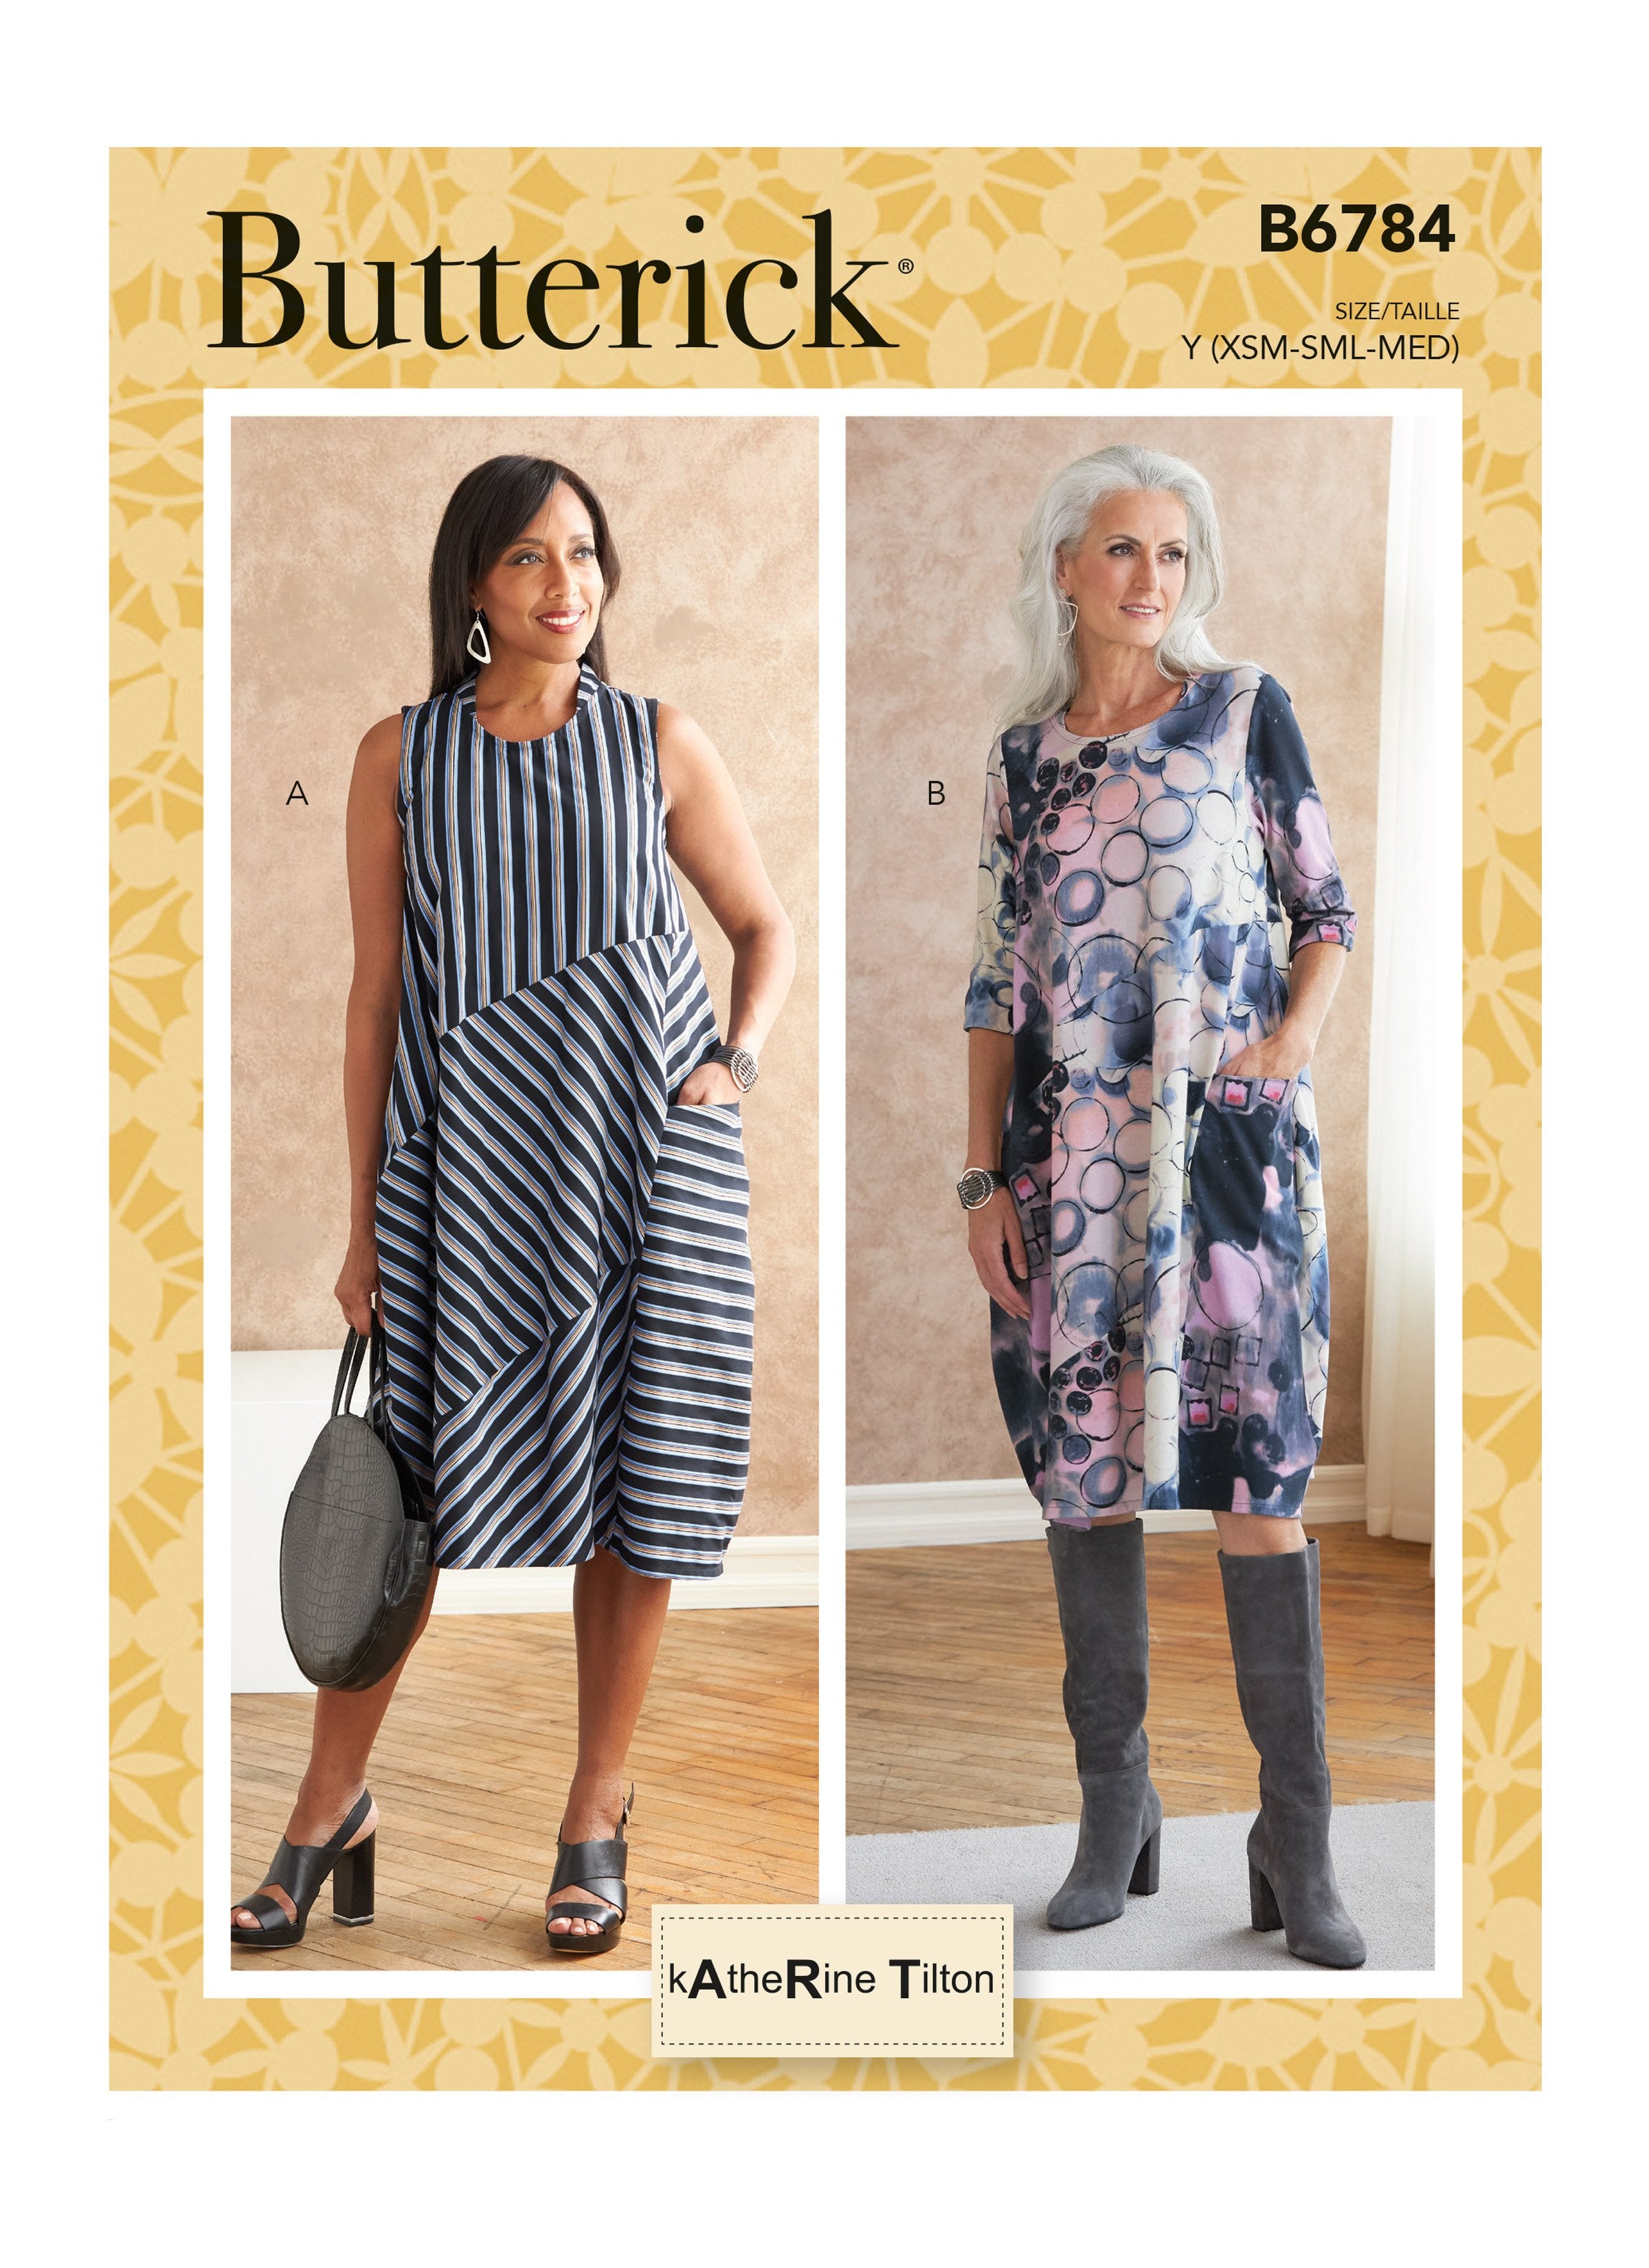 Butterick 6784 Misses' Dress sewing pattern from Jaycotts Sewing Supplies